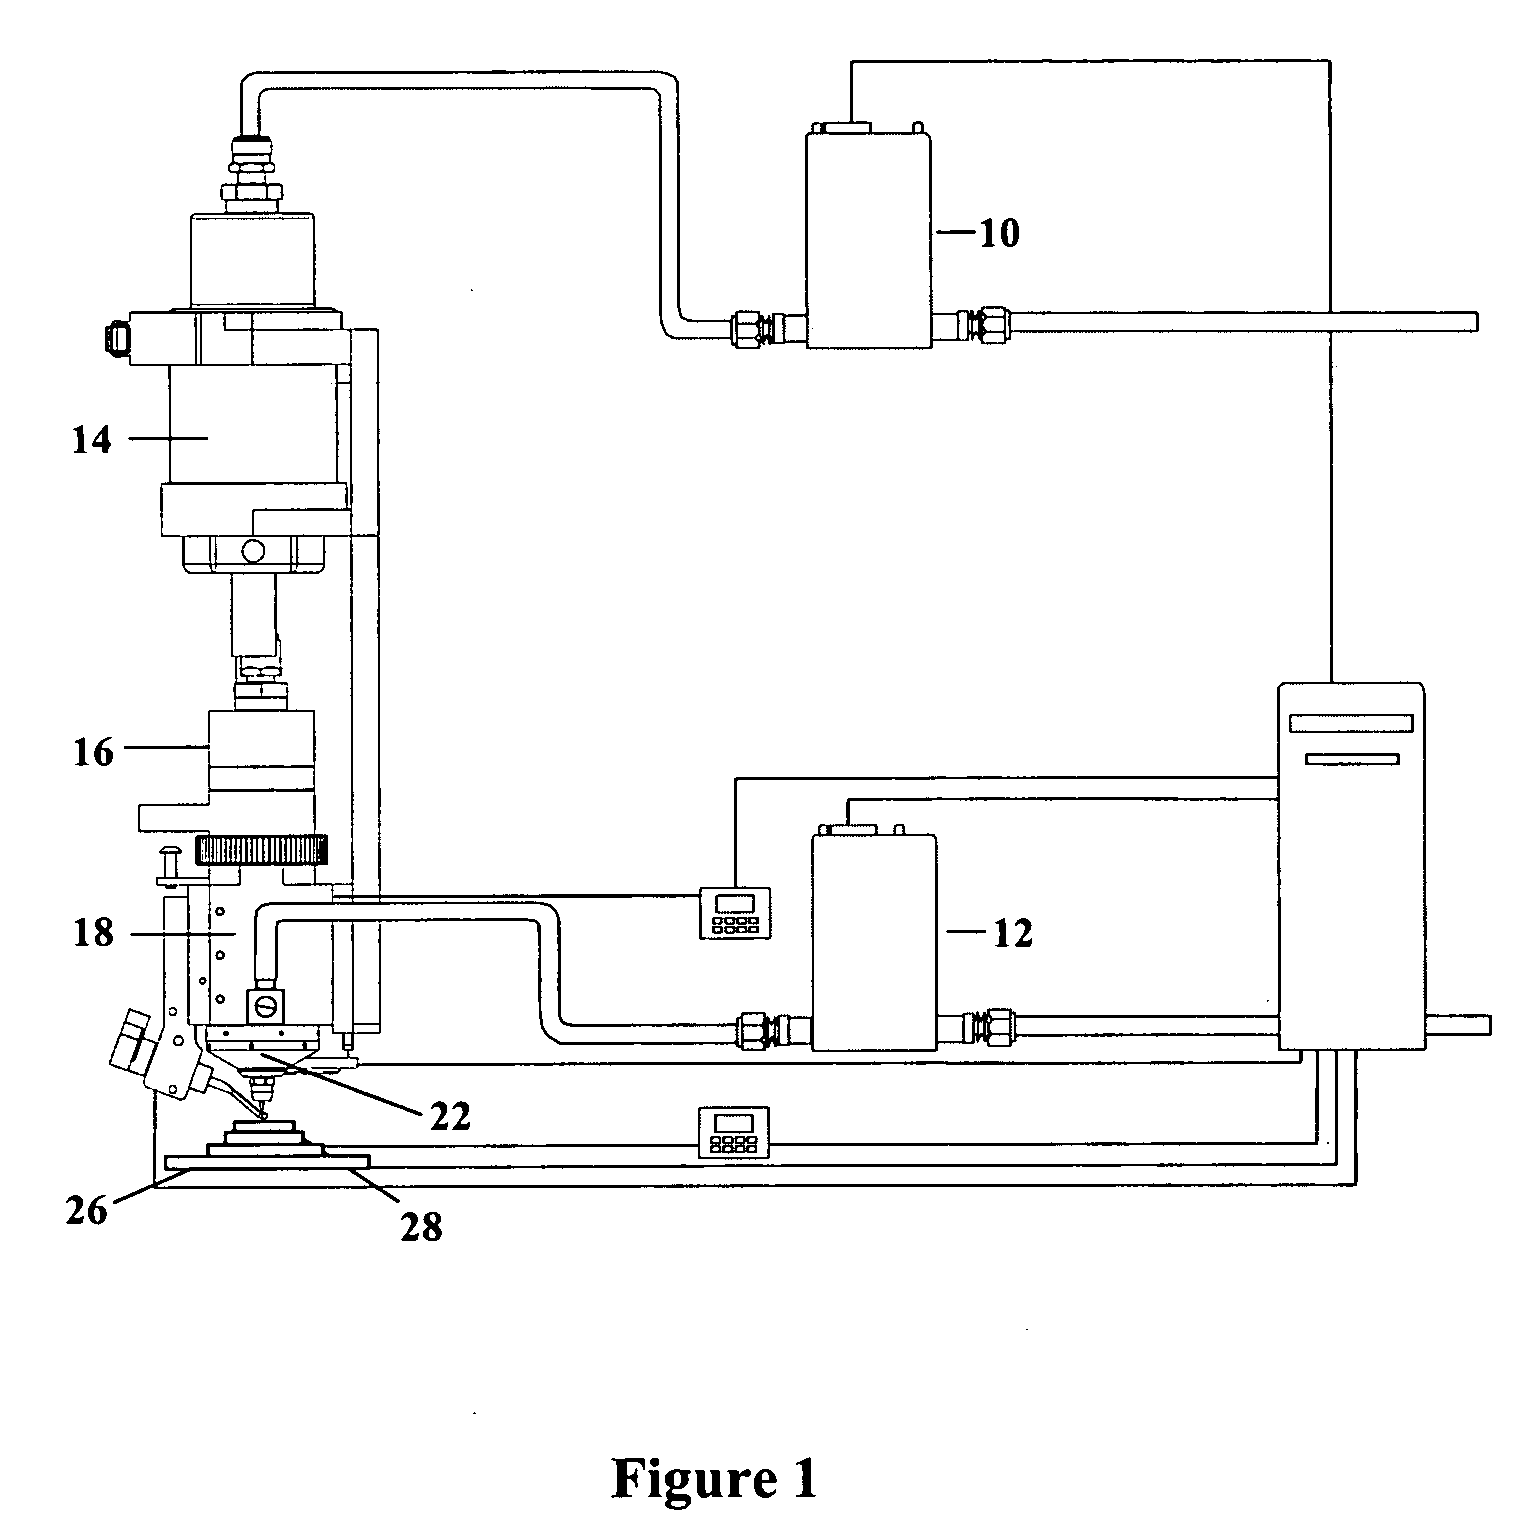 Method and apparatus for mesoscale deposition of biological materials and biomaterials